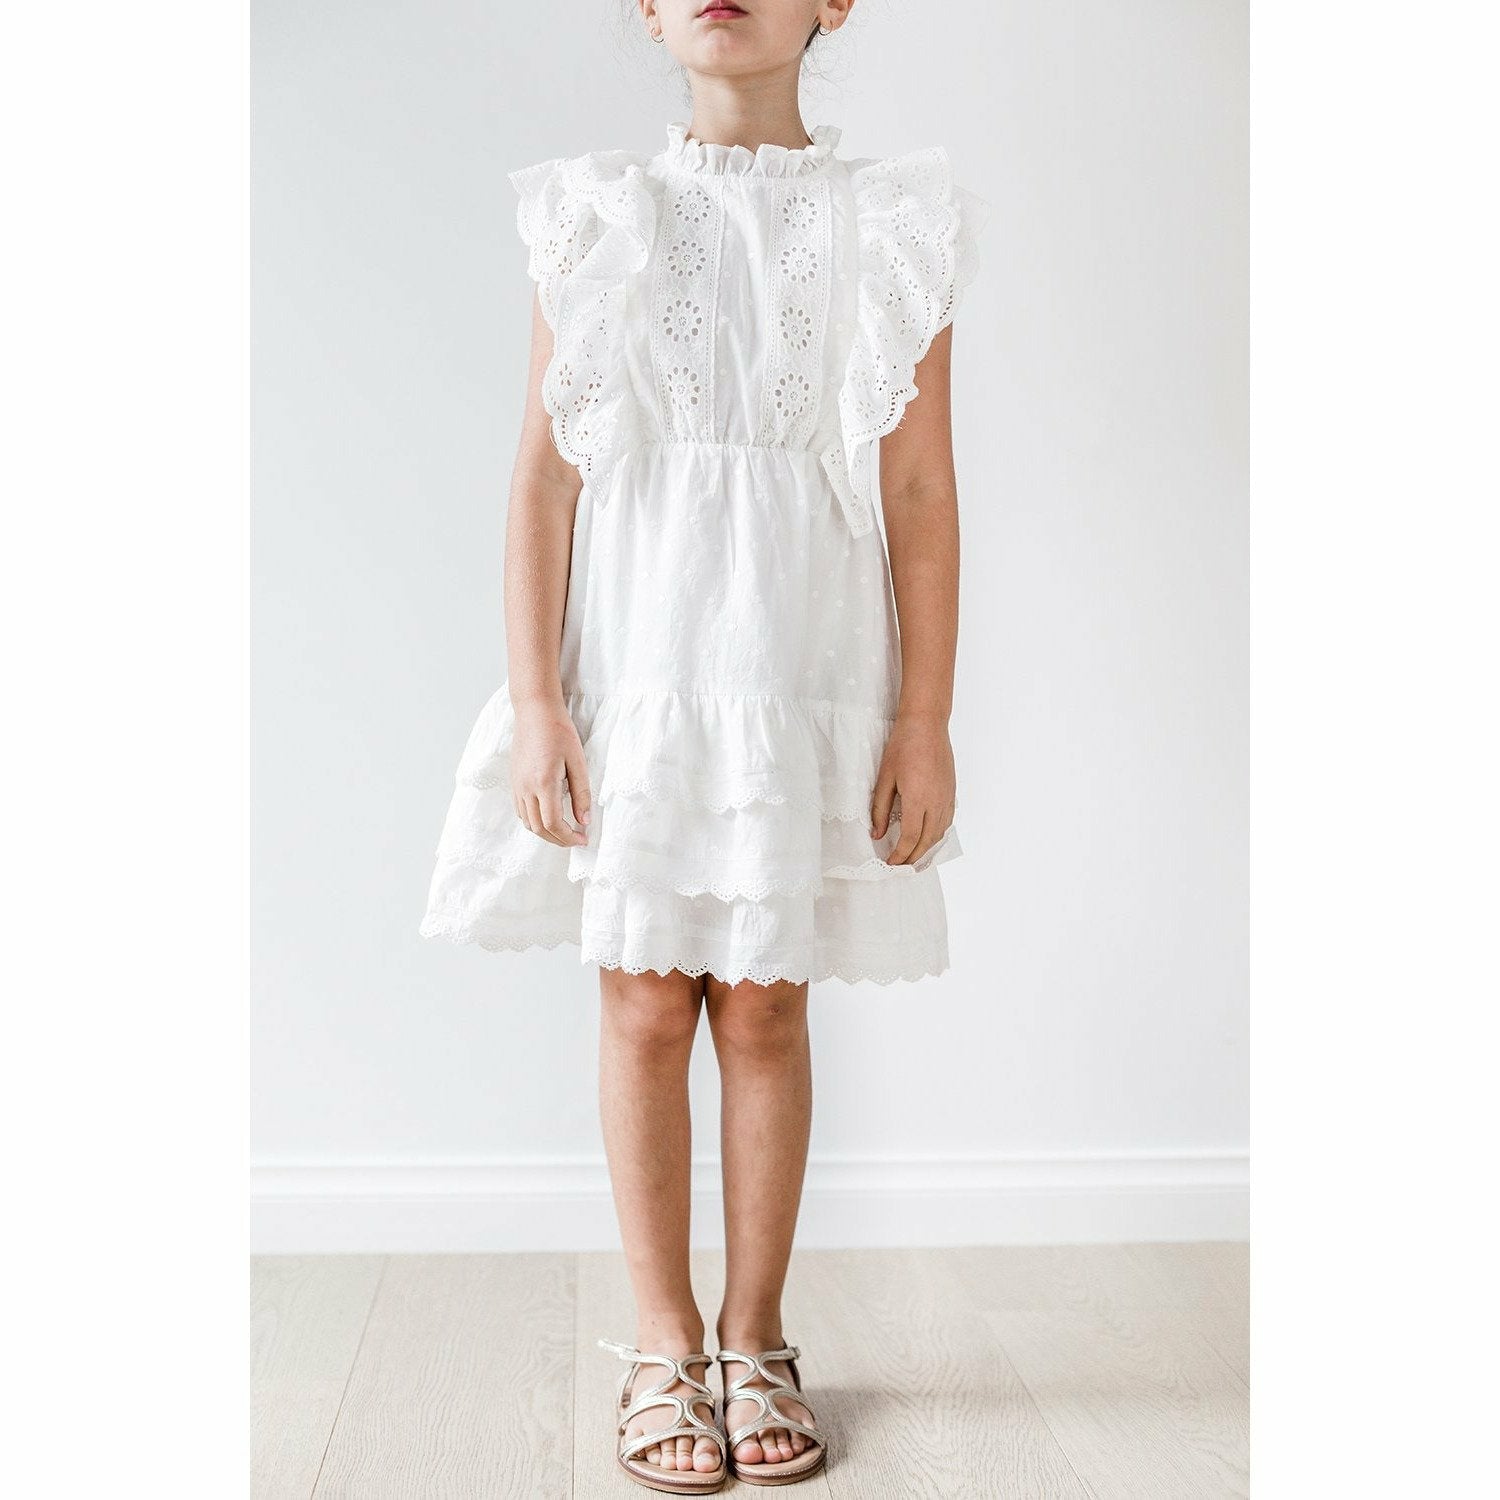 Embroidered Ruffle Dress - White